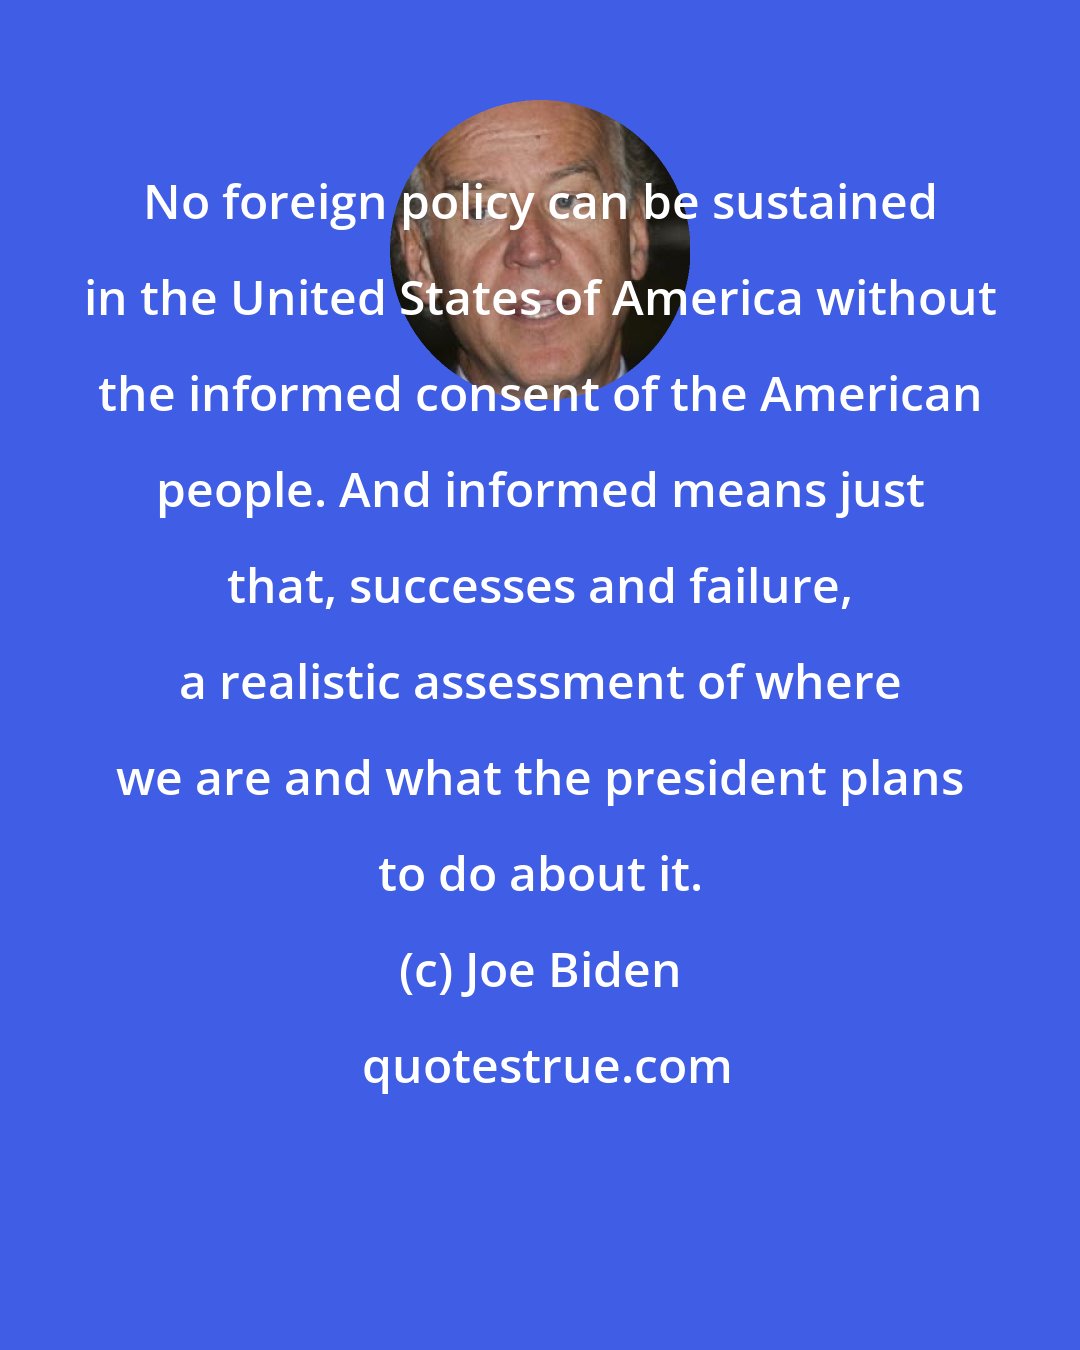 Joe Biden: No foreign policy can be sustained in the United States of America without the informed consent of the American people. And informed means just that, successes and failure, a realistic assessment of where we are and what the president plans to do about it.